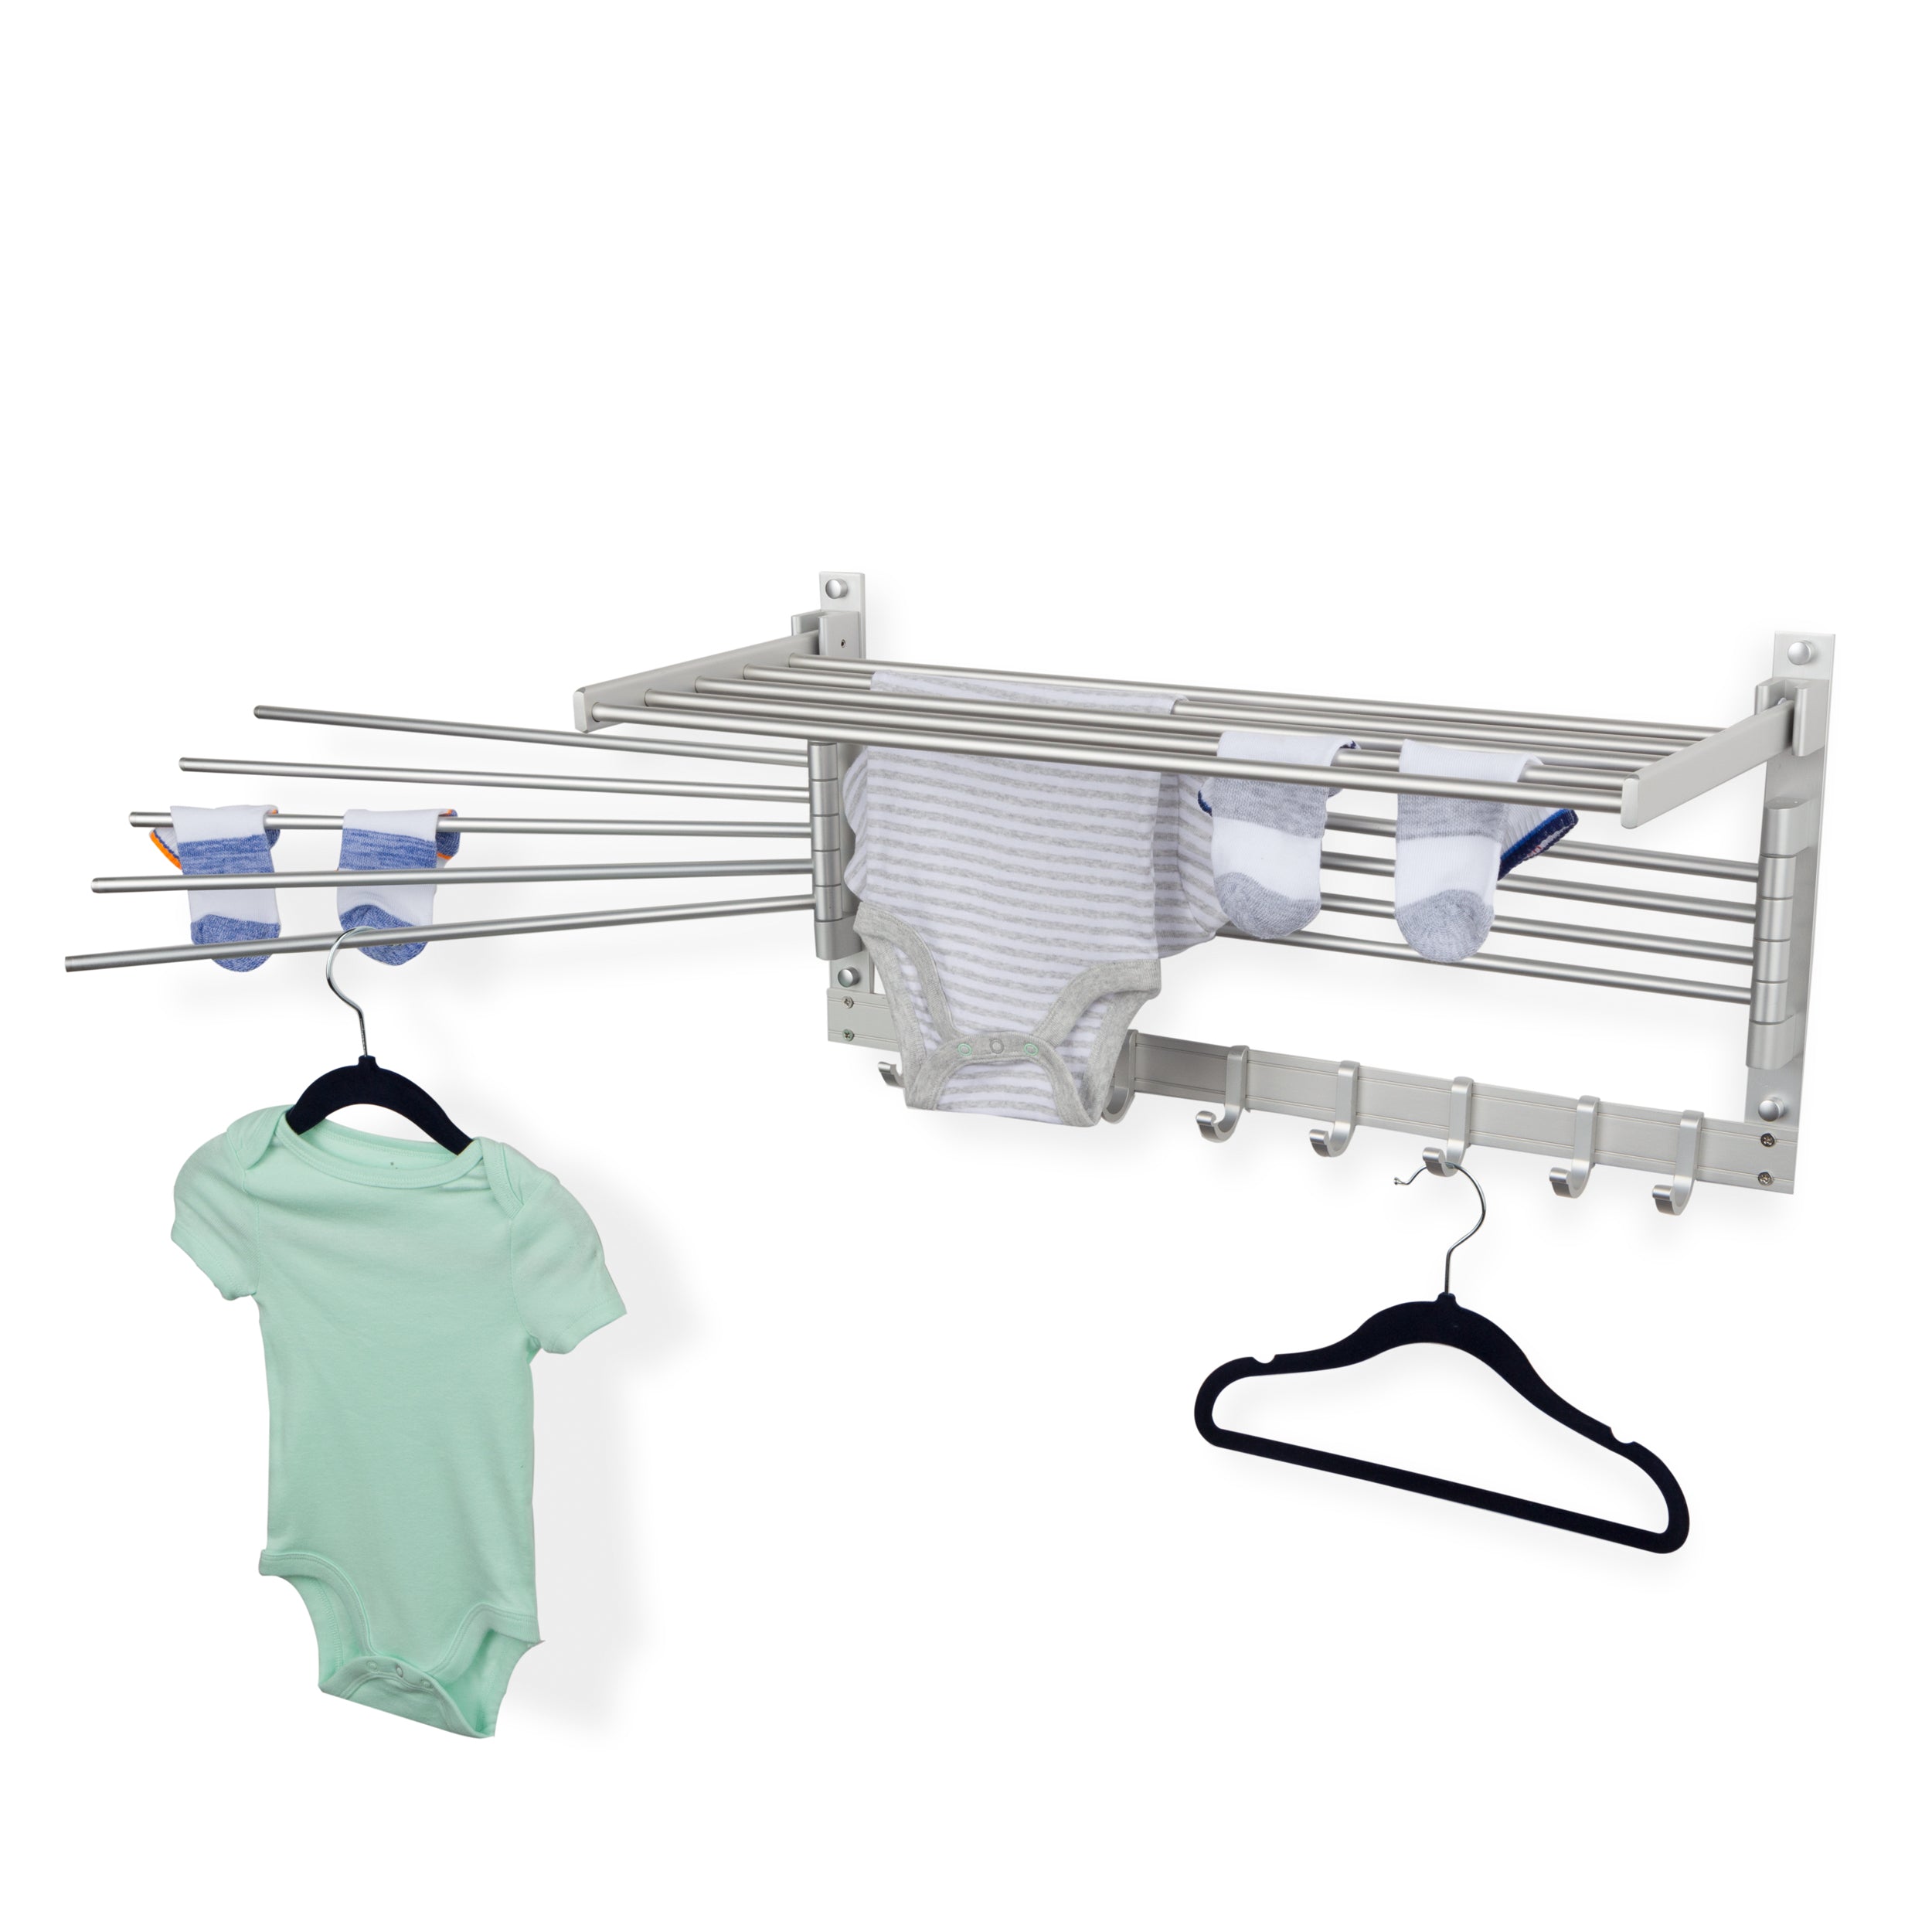 brightmaison Wall Mount Clothes Drying Rack & Laundry Room Organizer, 6.5 Yards Drying Capacity Stainless Steel Silver Laundry Rack